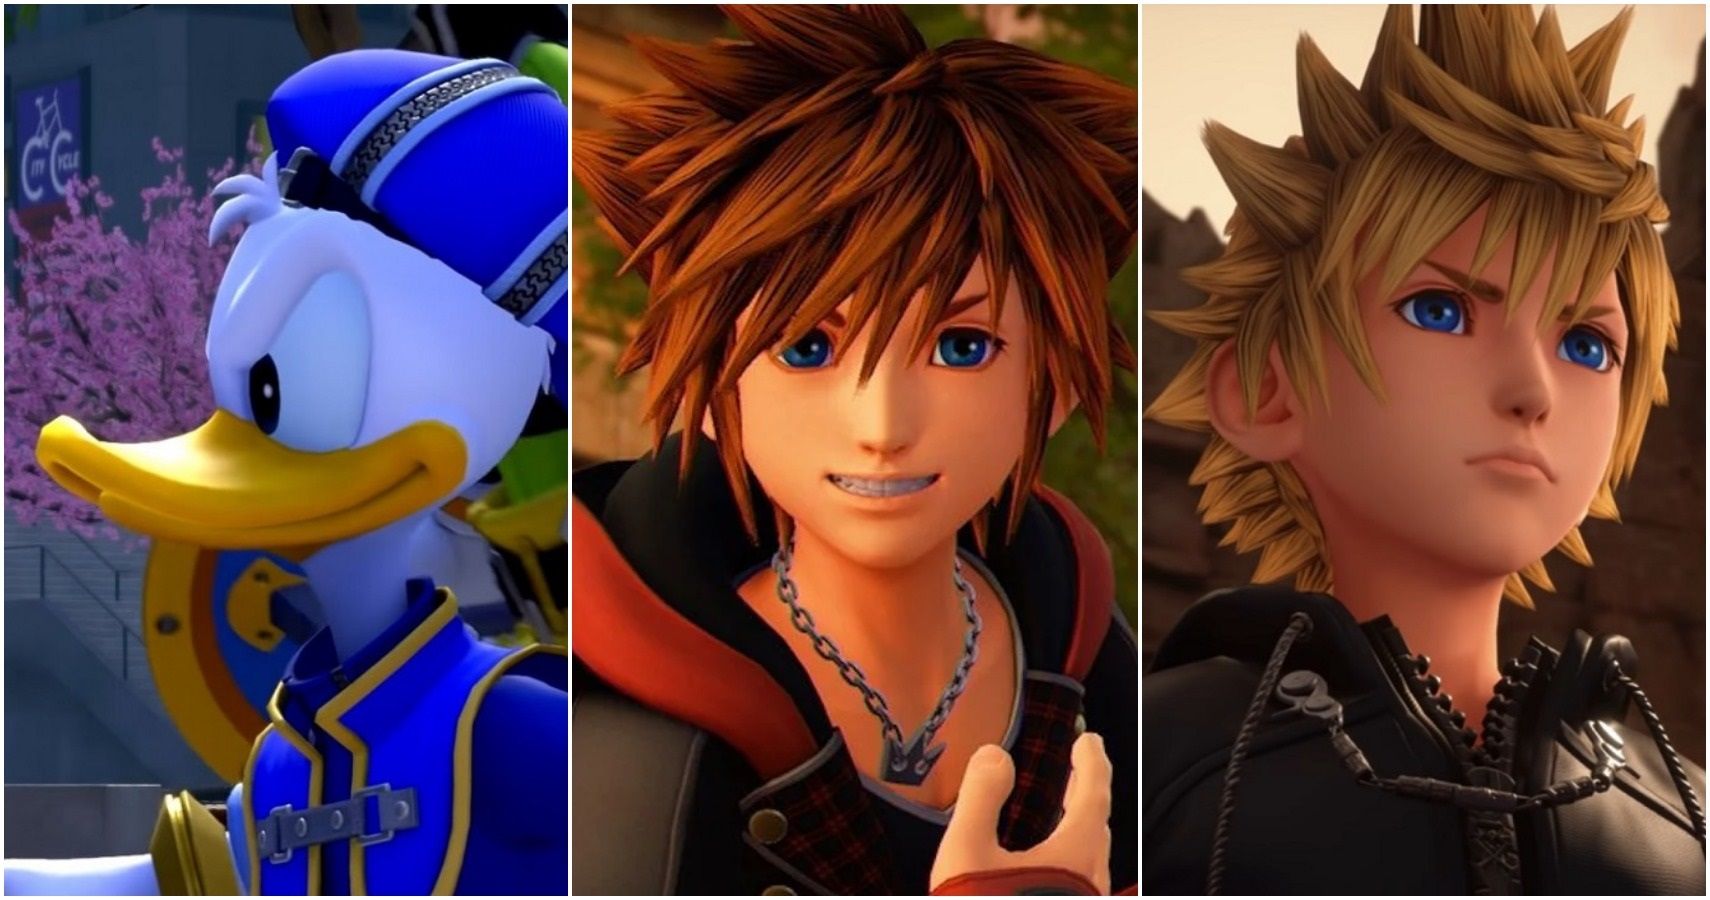 Kingdom Hearts: Ranking The 10 Best Characters Across The Series